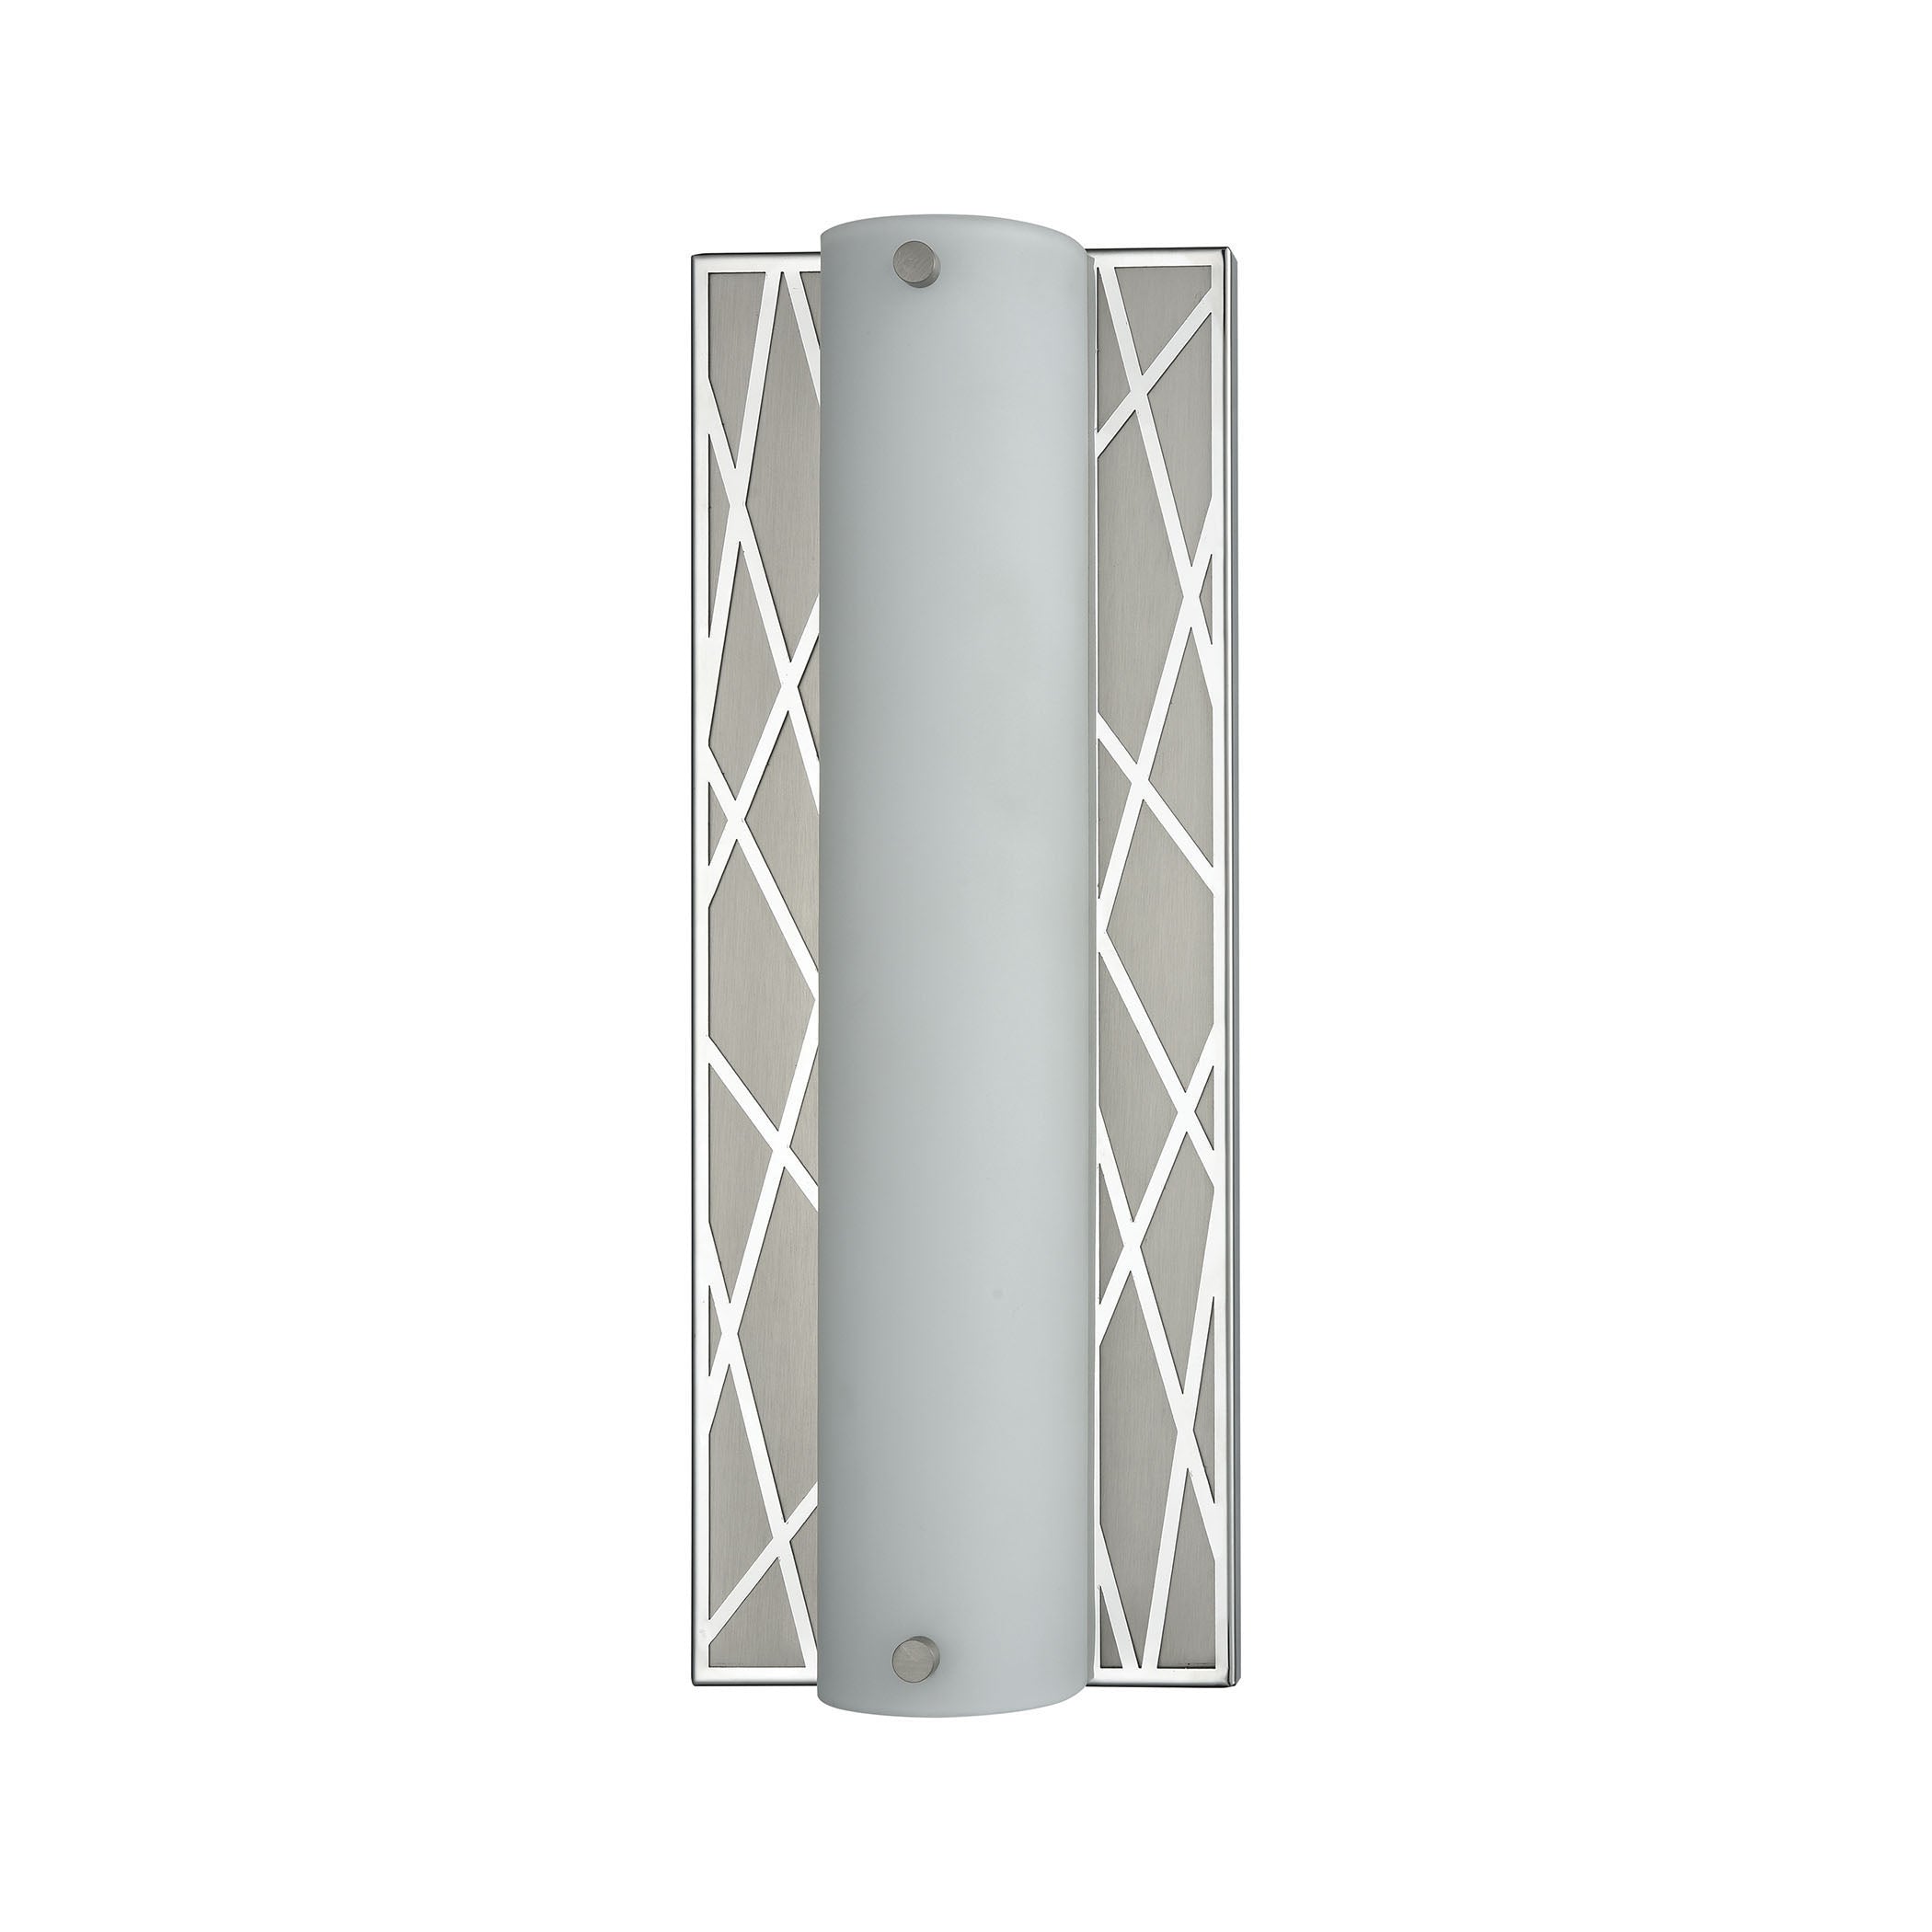 ELK Lighting 85130/LED Captiva 1-Light Vanity Sconce in Polished Stainless and Matte Nickel with Diffuser - Integrated LED